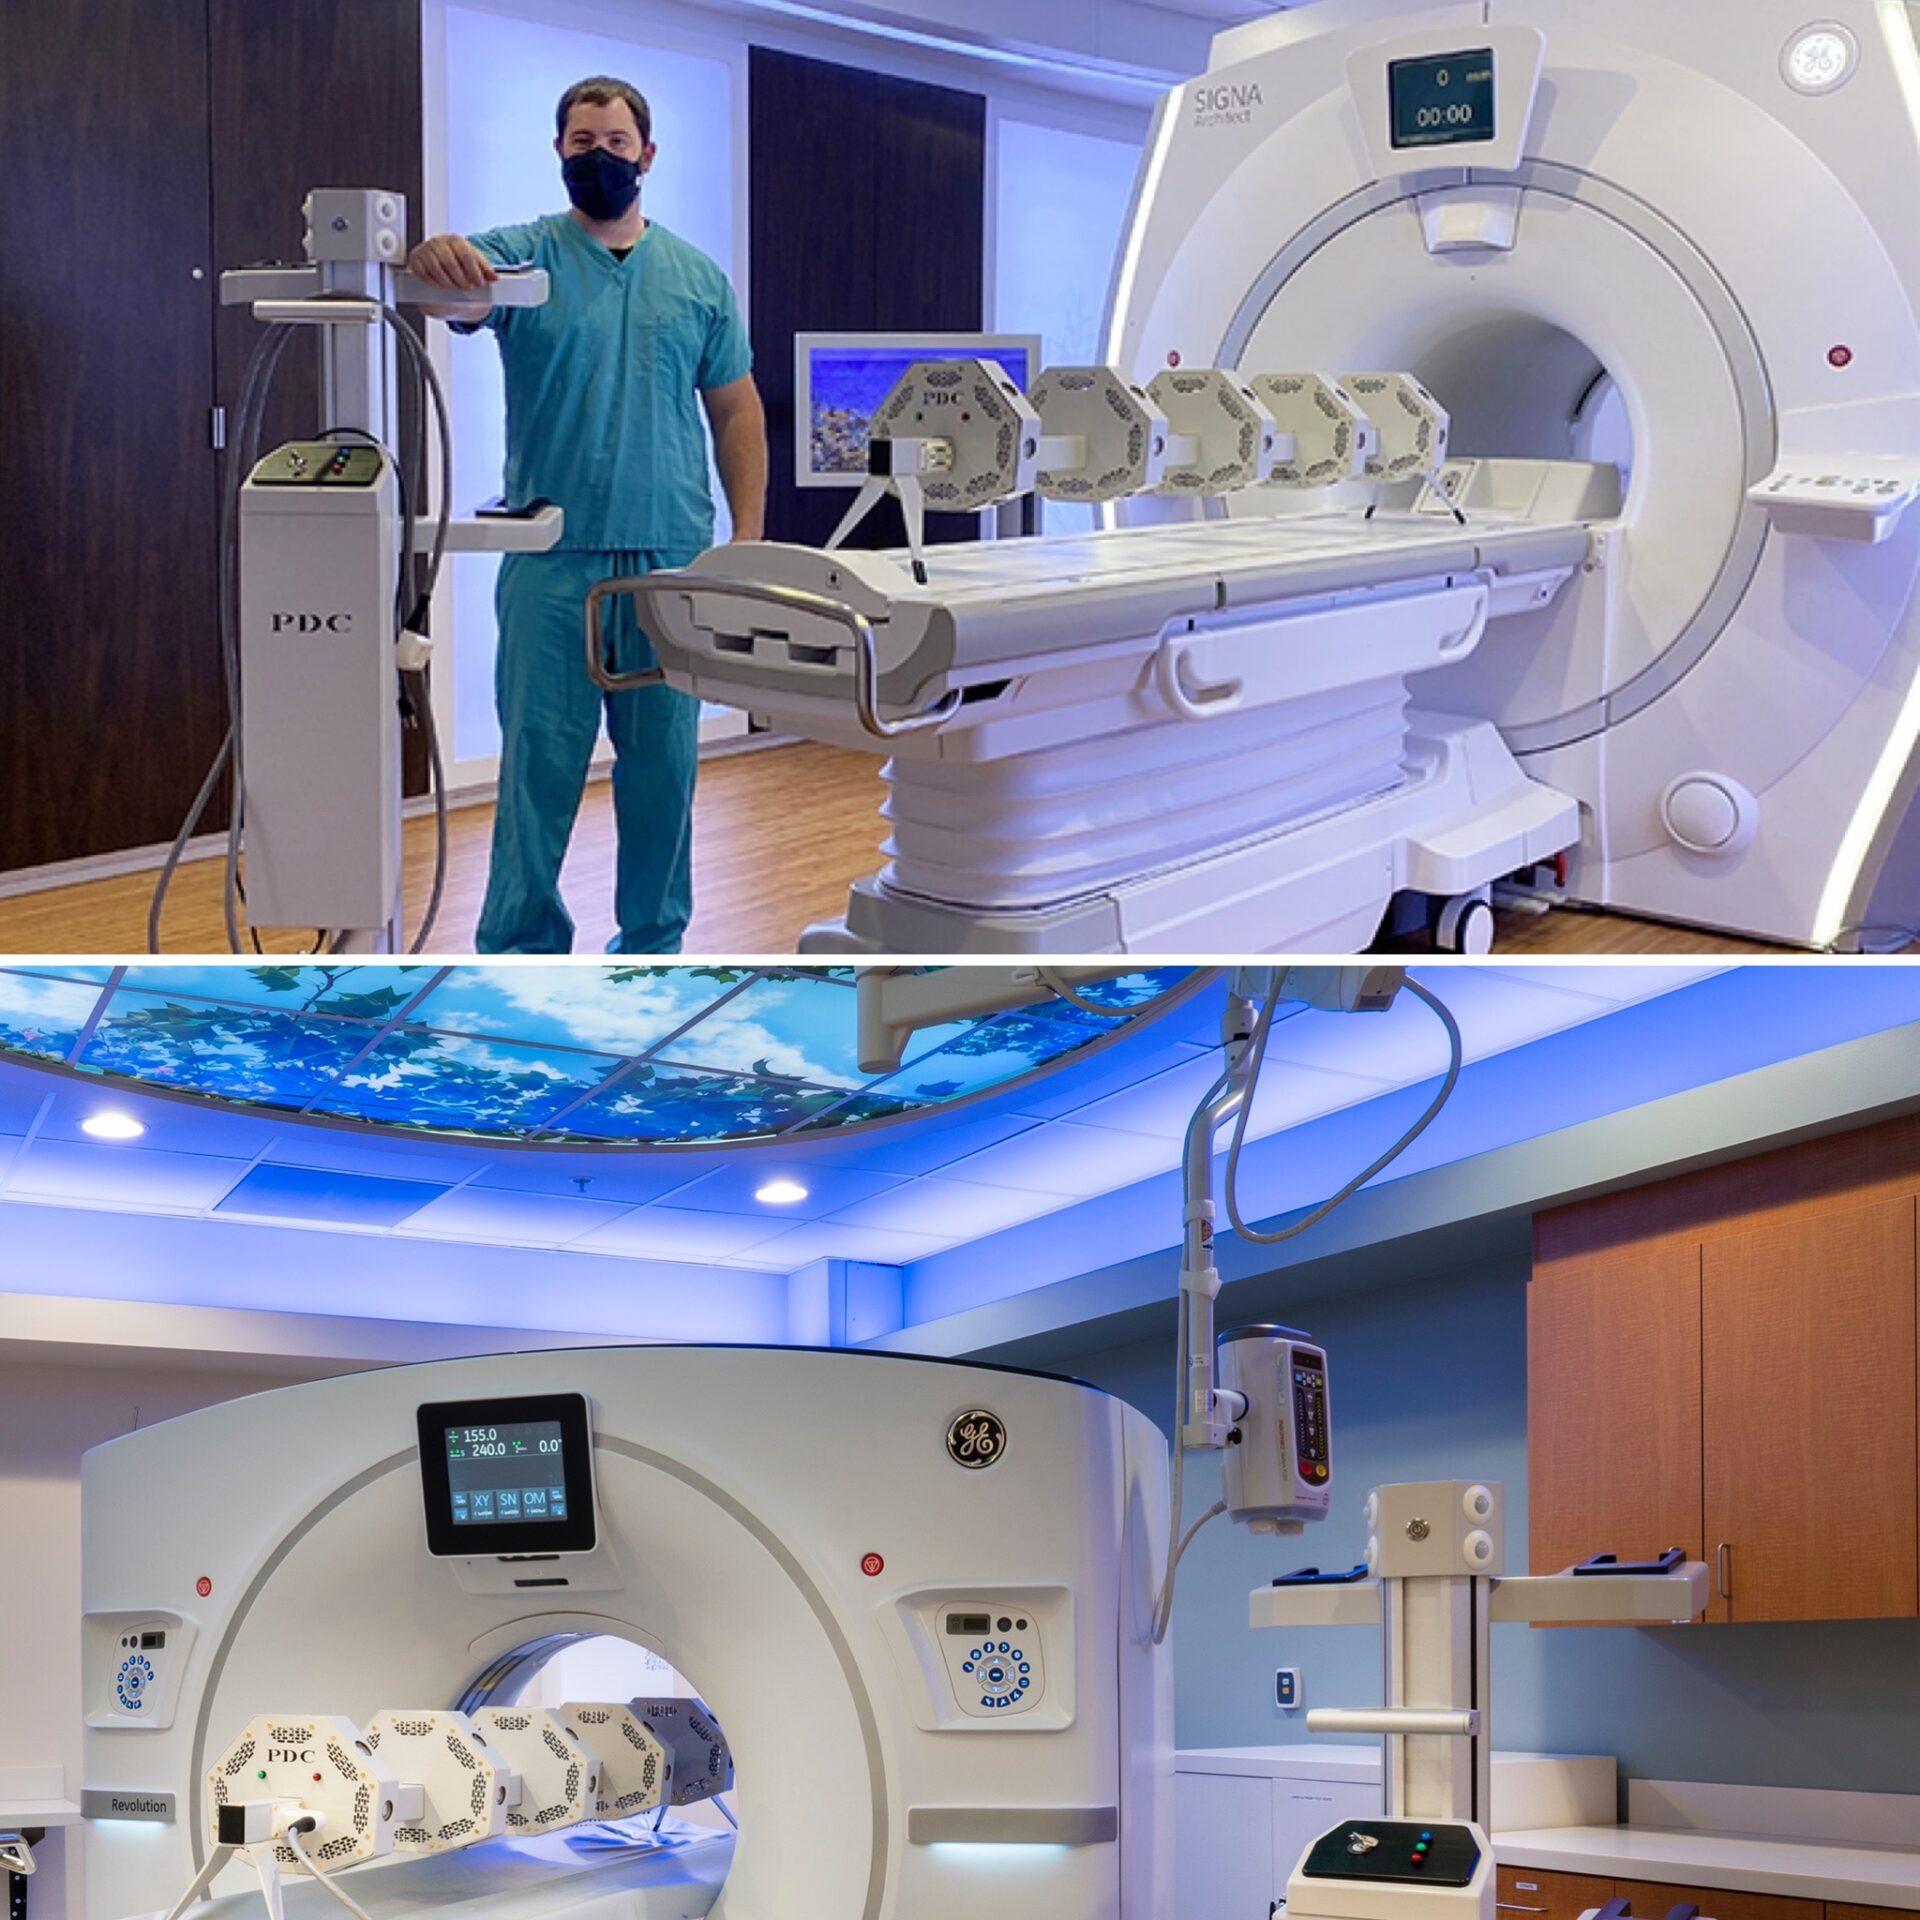 UV-C LED Bore Disinfection System for MRI, CT and any imaging bore and table.